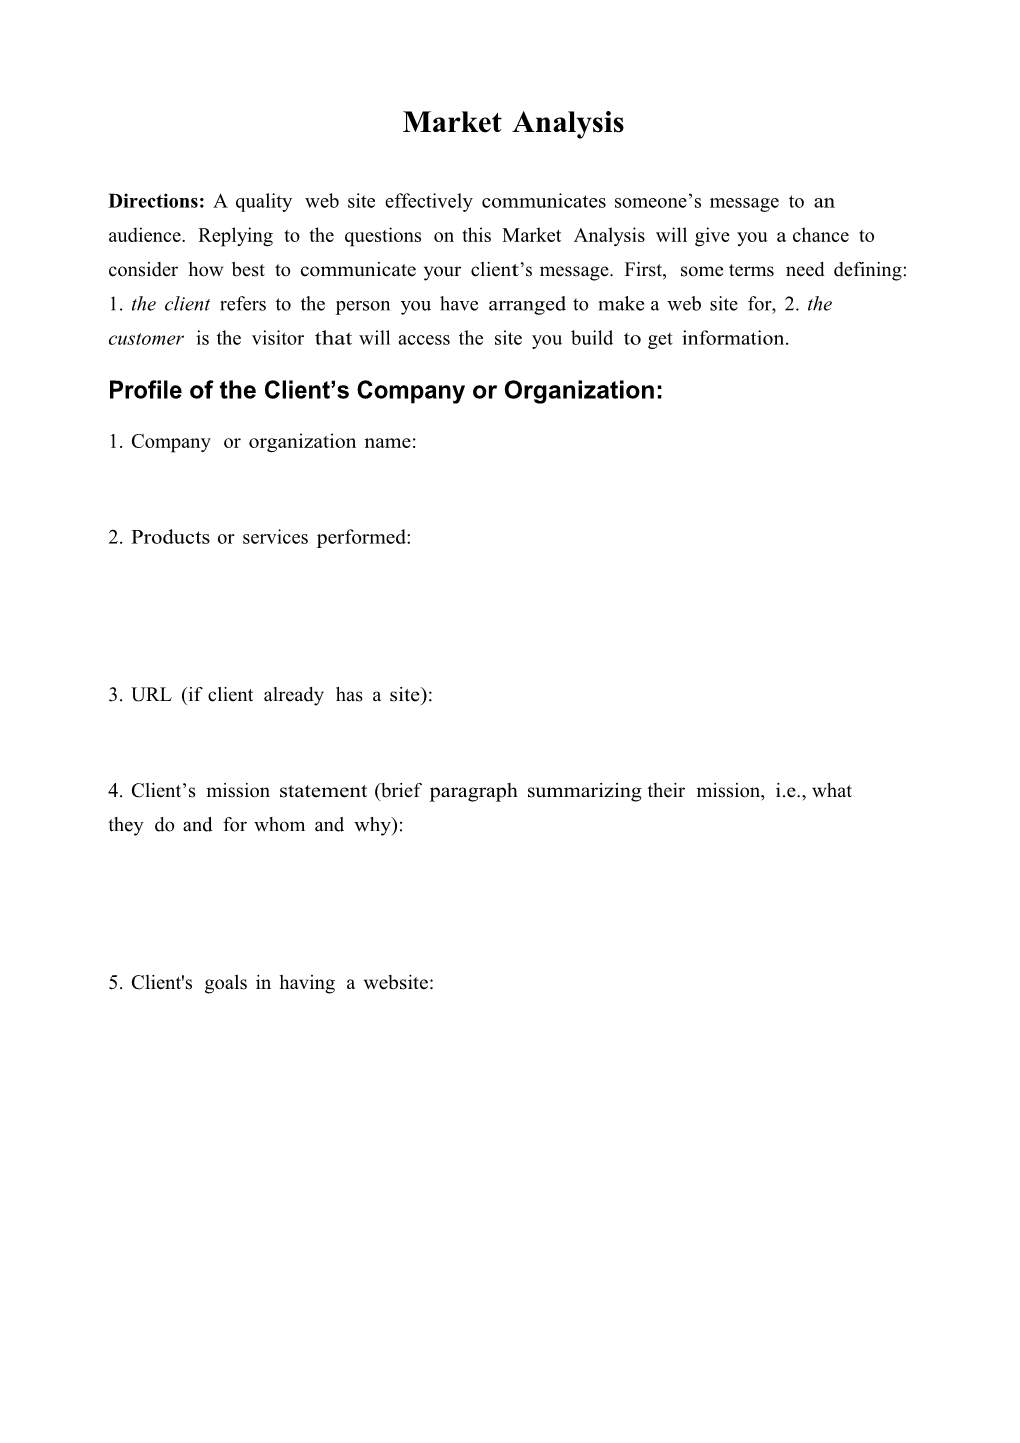 Profile of the Client S Company Or Organization